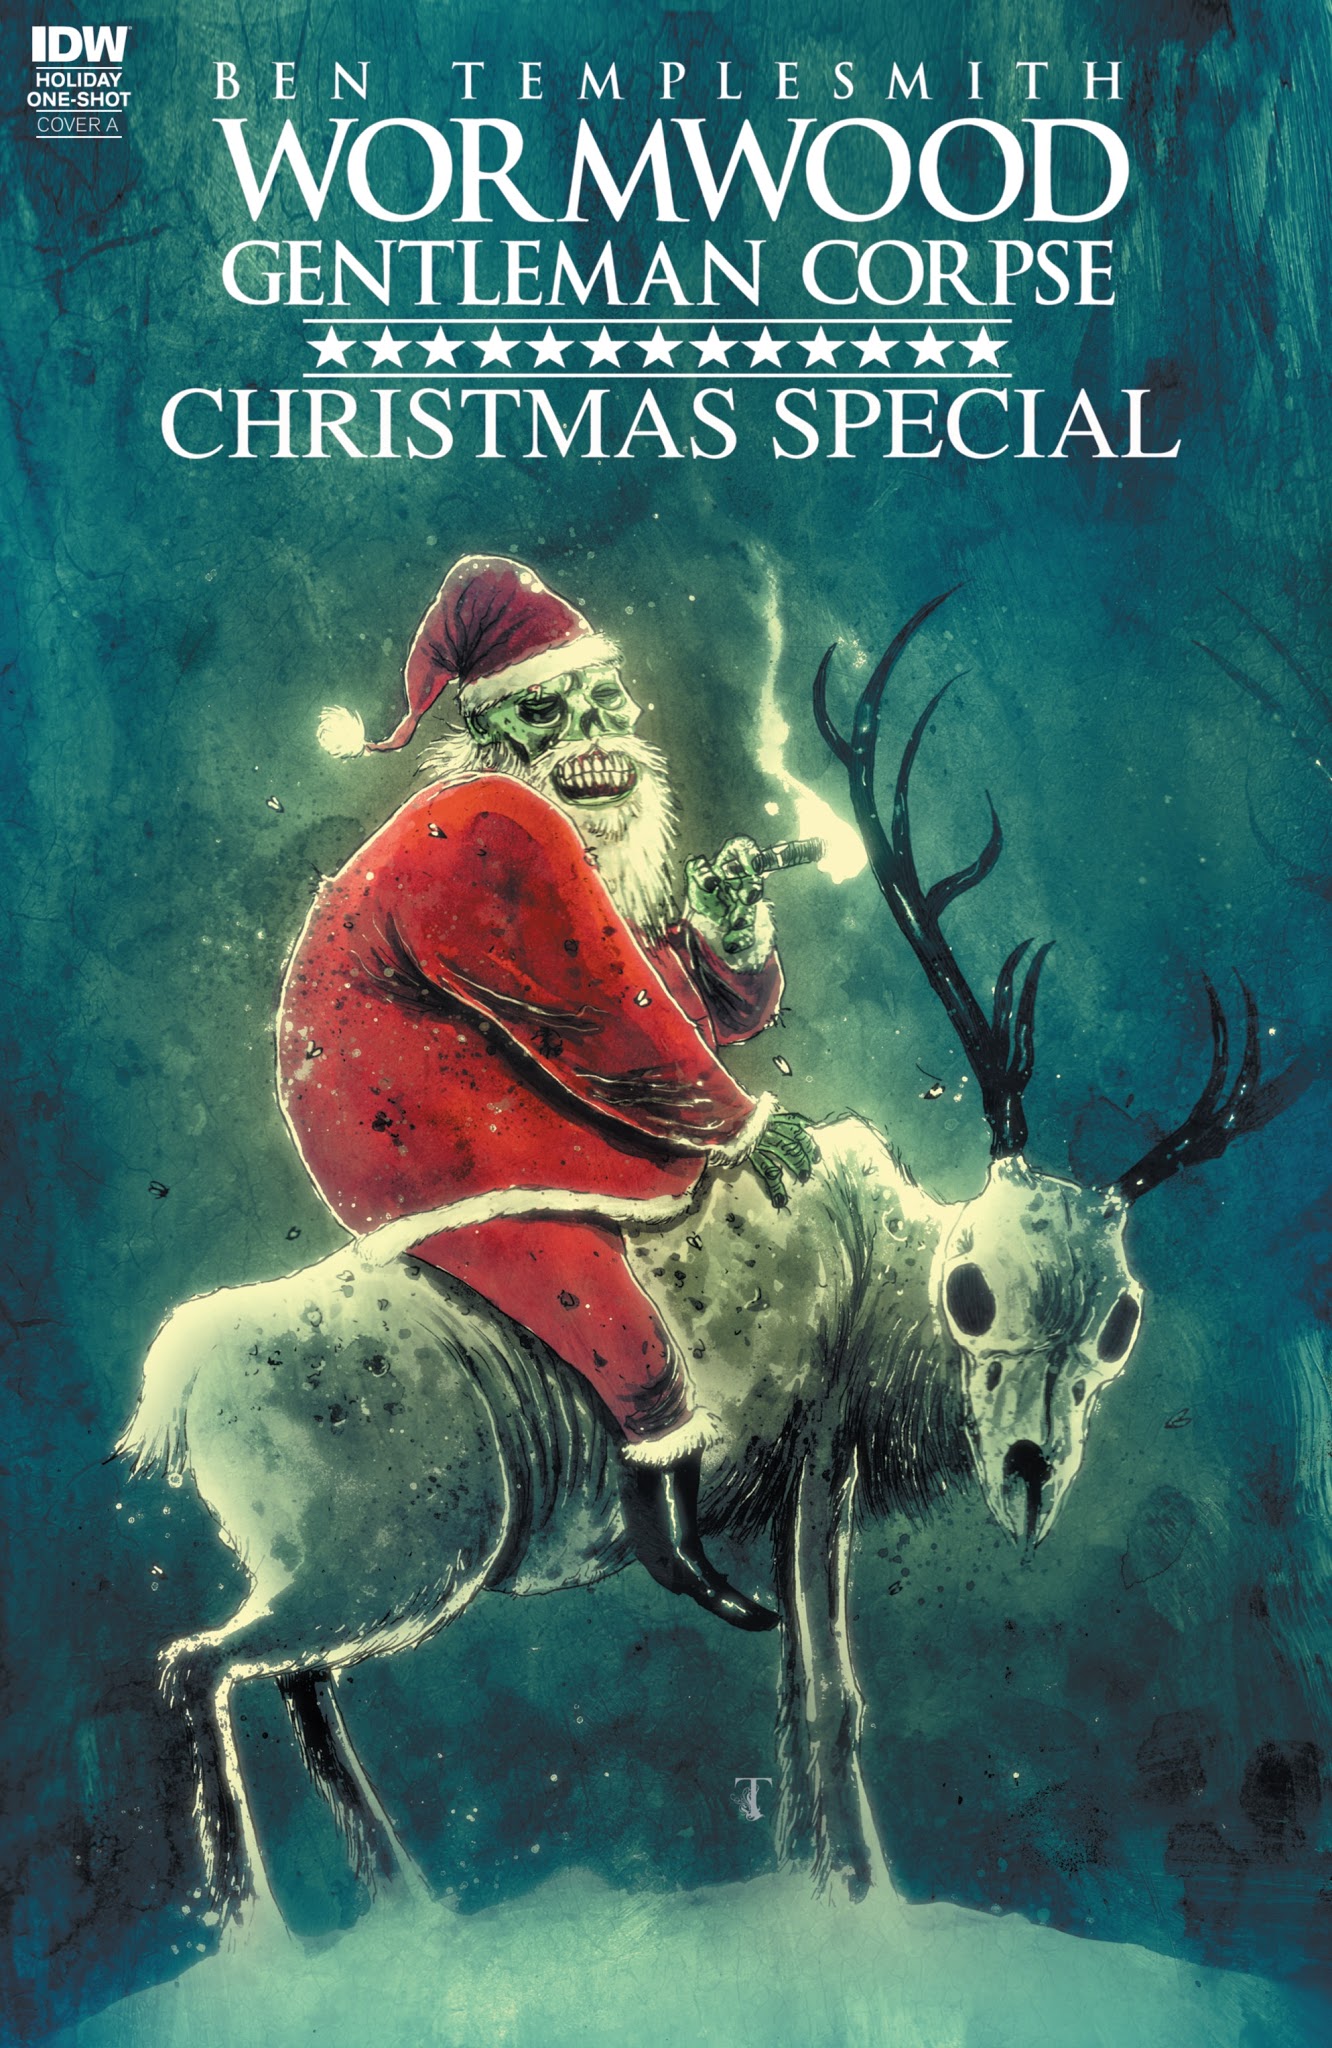 Read online Wormwood Gentleman Corpse: Christmas Special comic -  Issue # Full - 1